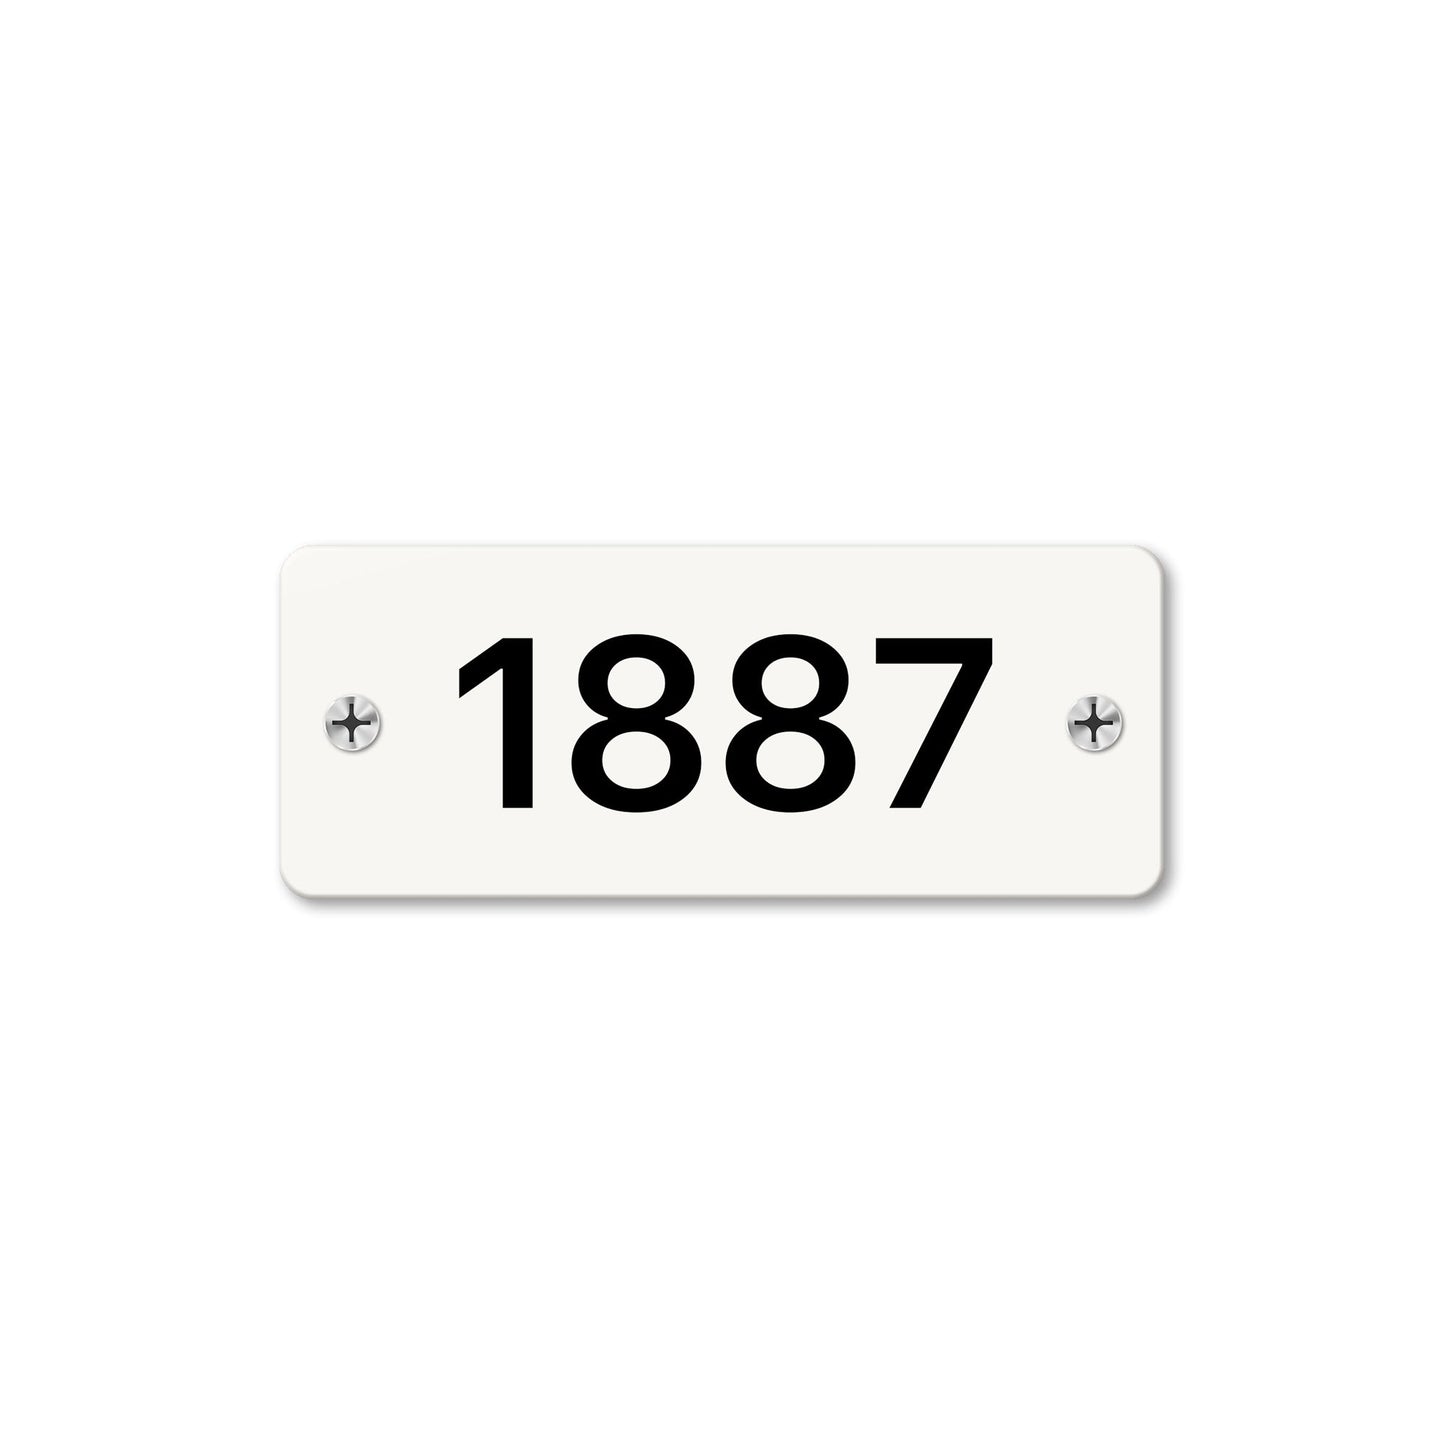 Numeral 1887